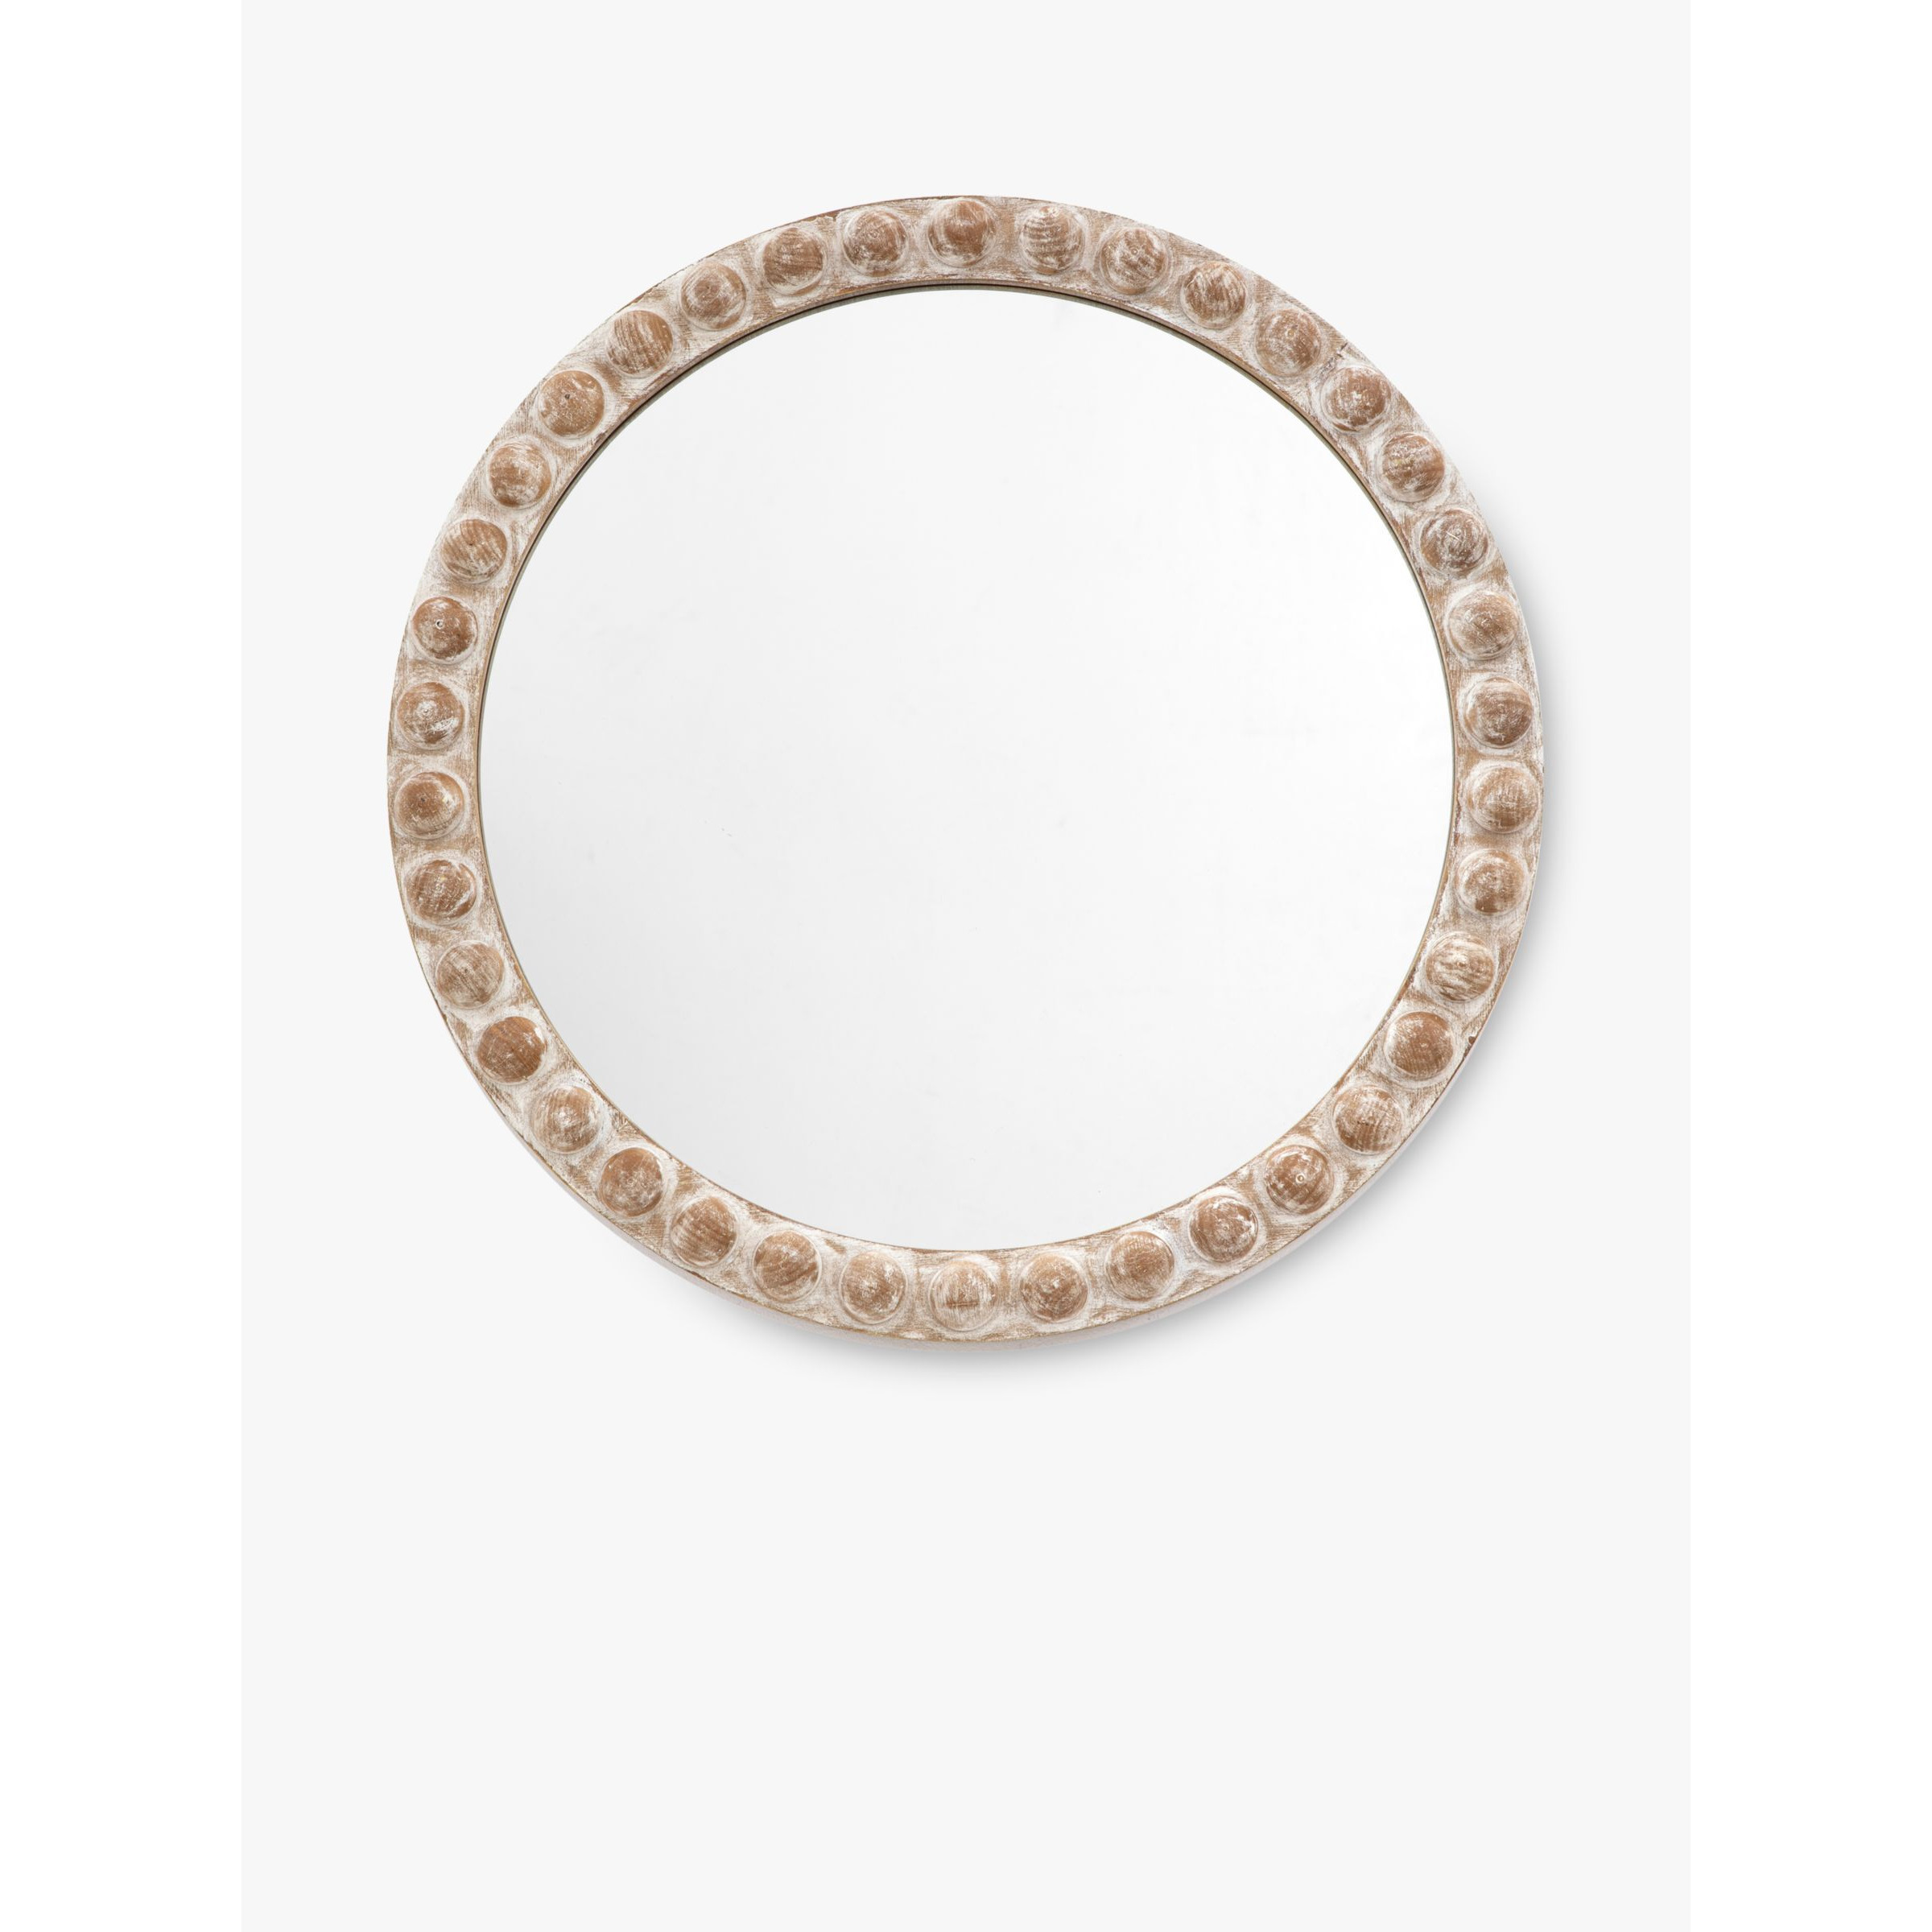 Gallery Direct Aspen Wood-Effect Round Wall Mirror, Natural - image 1